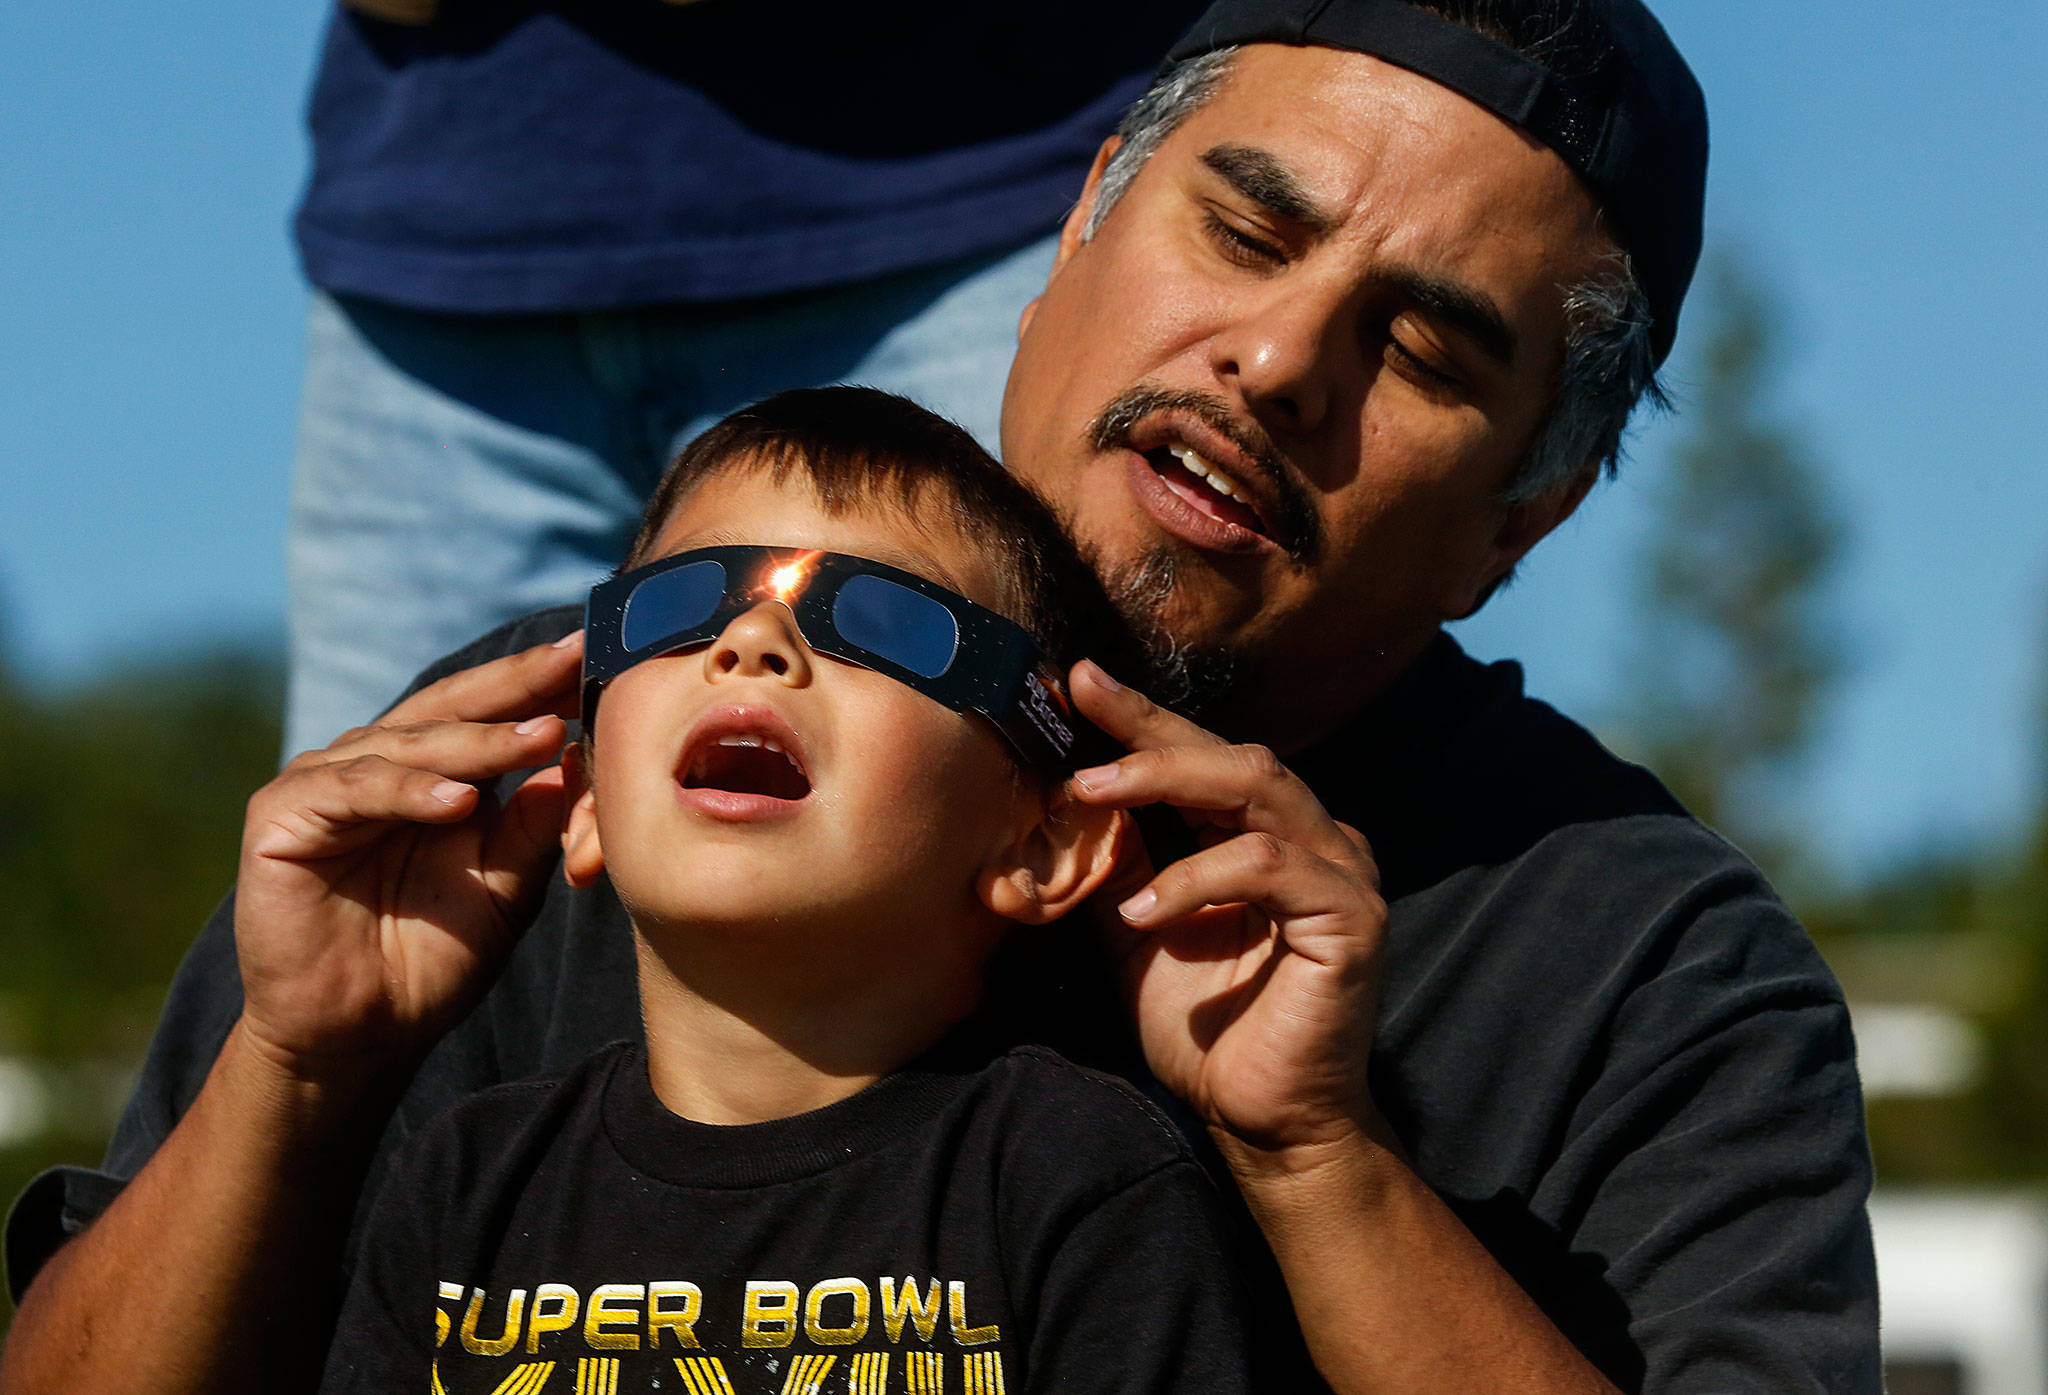 Just off Paine Field near the Future of Flight Aviation Center, Ben Flores of Mukilteo helps his sons, Vincent, 5, and Benny (back), 9, view the solar eclipse through certified safety glasses on Aug. 21. (Dan Bates / The Herald) 
